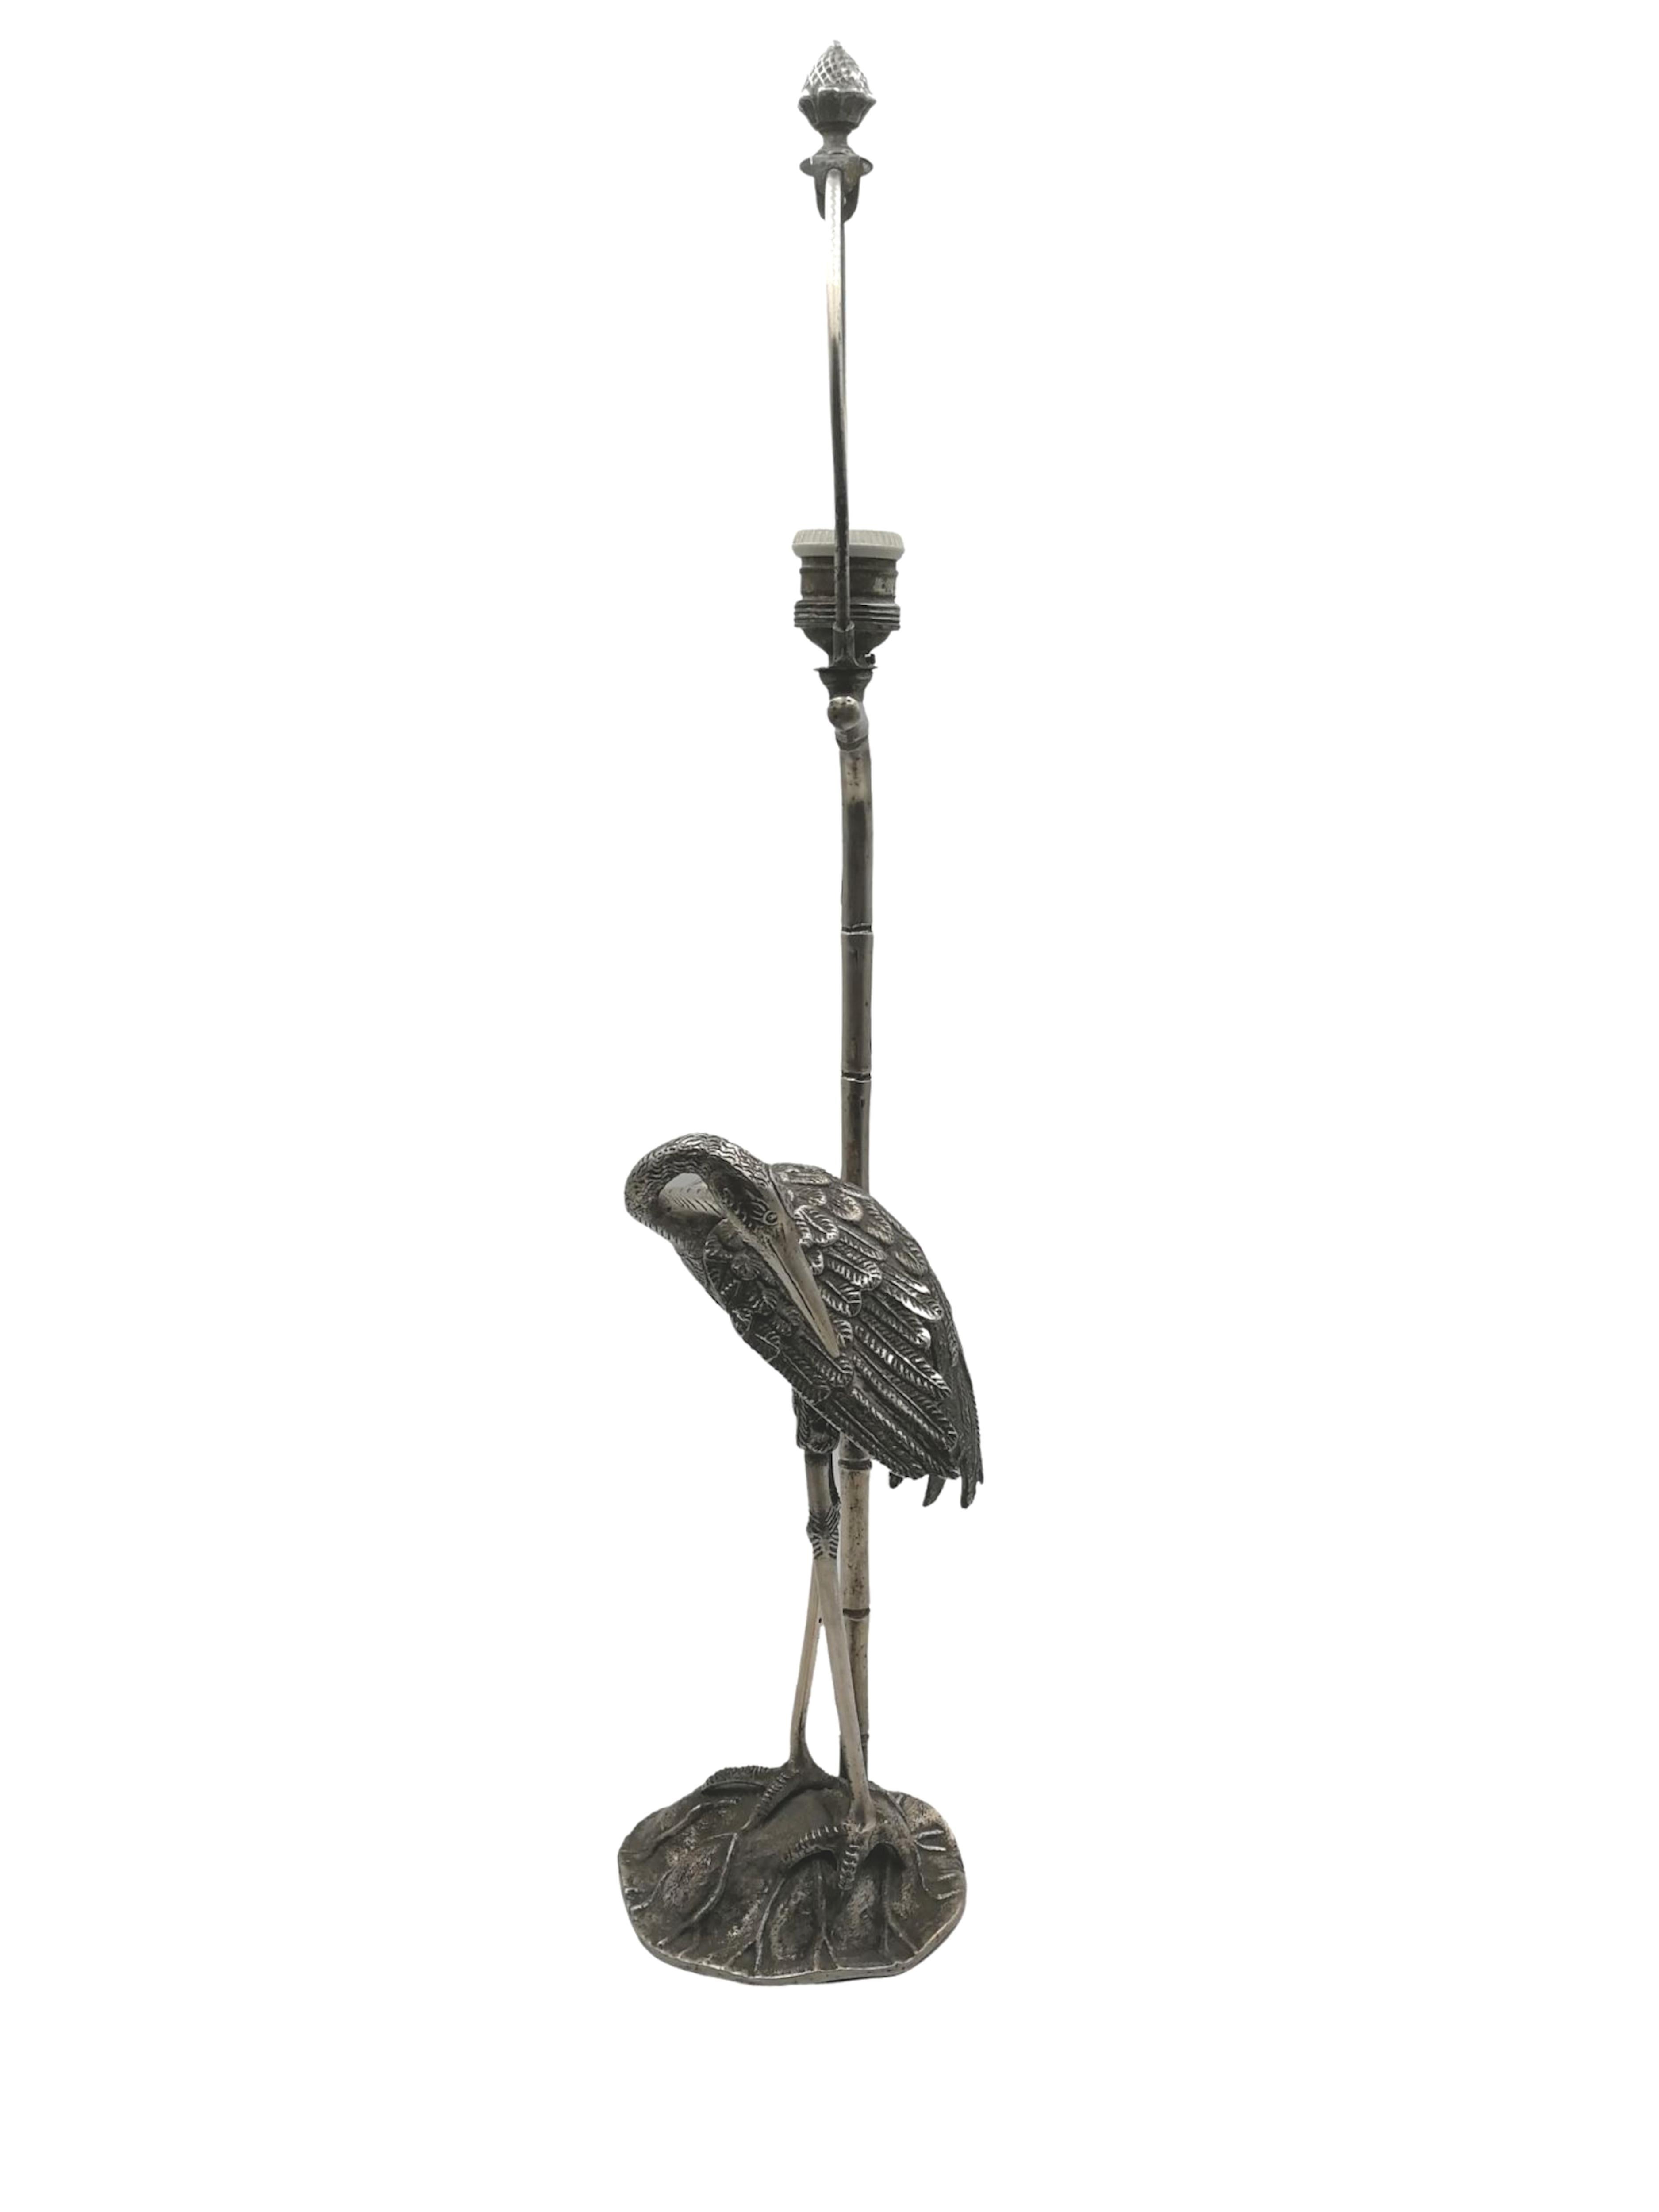 Stunning Art Deco silver plated bronze lamp of a heron, with faux bamboo shade support designed by the prestigious French Maison Baguès of Paris, circa 1940. 
Sold without the shade.
Bedside lamp or table lamp.
Very decorative.
Very elegant